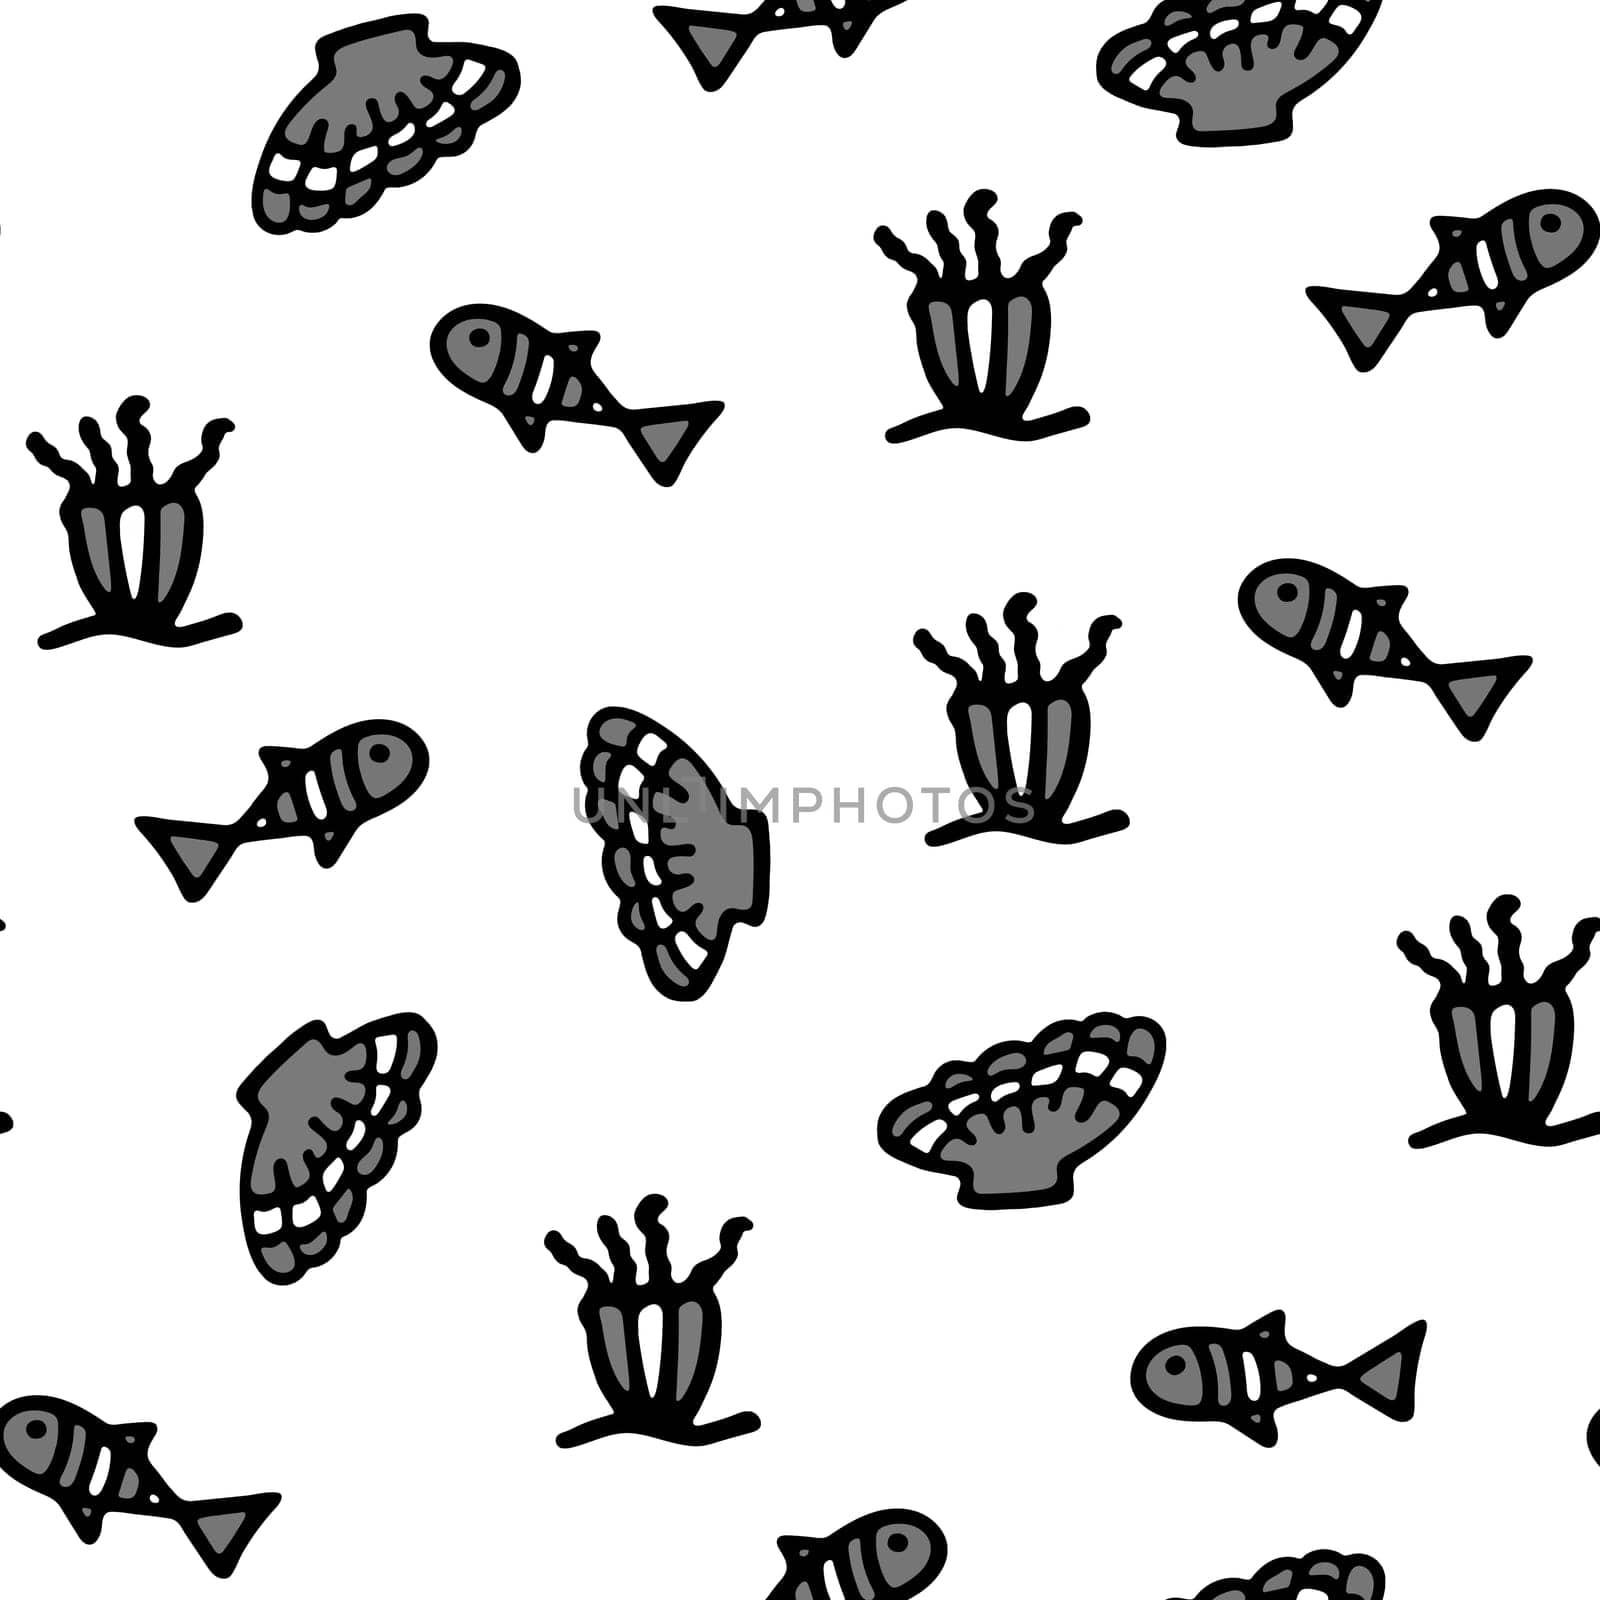 Small Fishes Seamless Pattern. Black and White Background for Kids with Hand Drawn Doodle Cute Fish, Shellfish and Sea Anemone. Cartoon Sea Animals illustration. Underwater World Digital Paper.